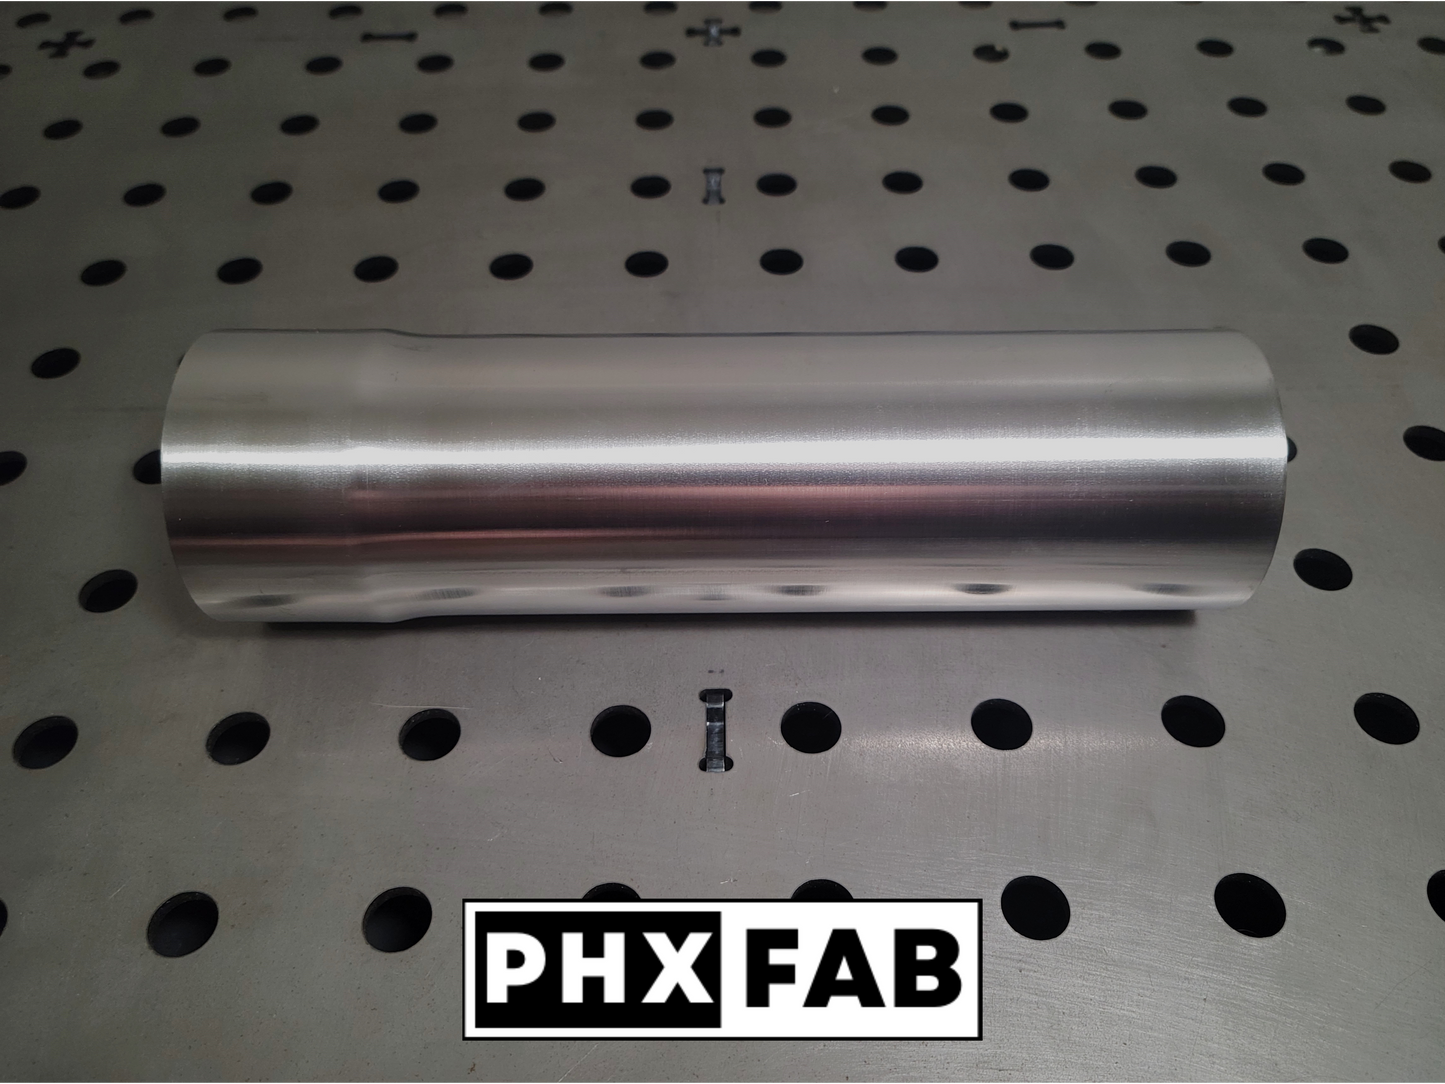 2 1/4" X 8" Stainless Steel Slip On Extension